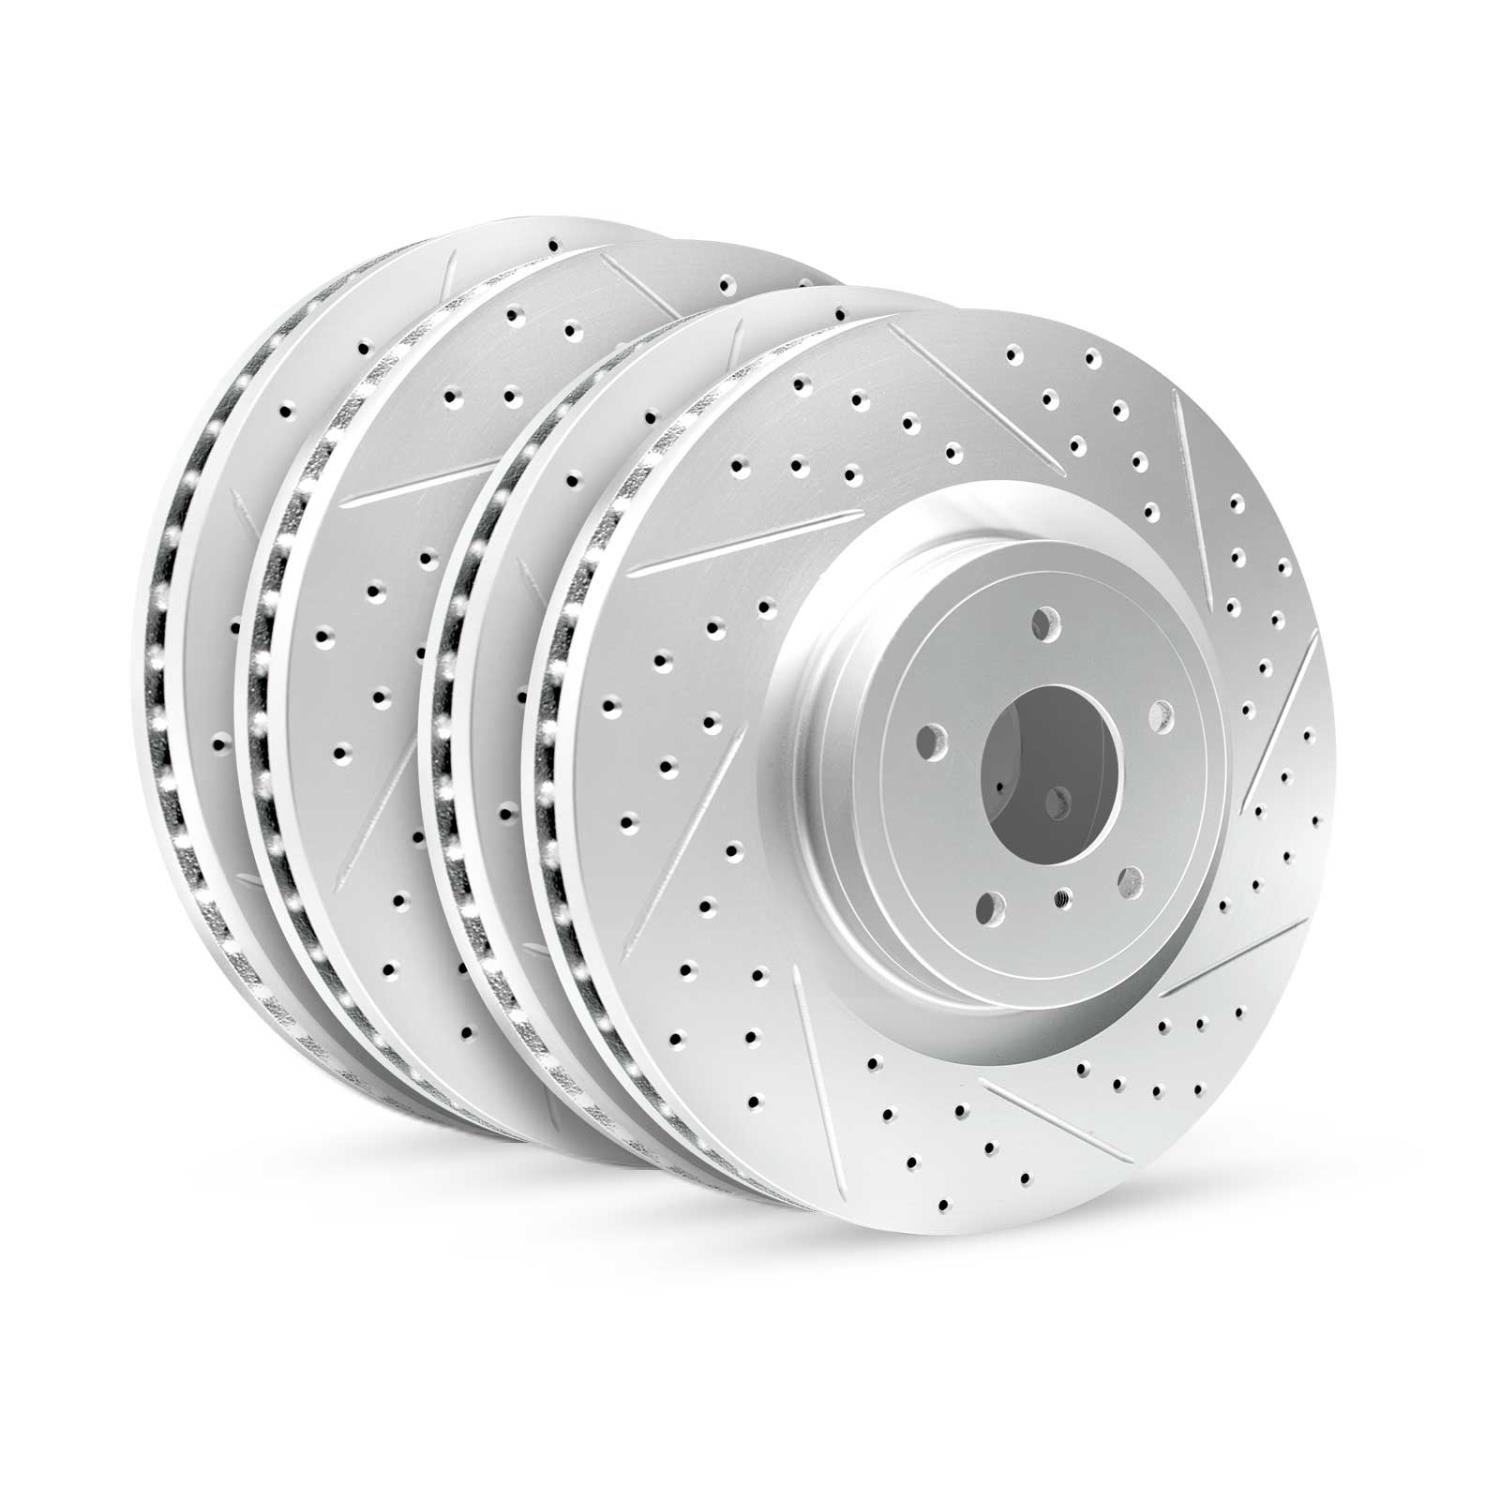 GEO-Carbon Drilled/Slotted Rotors, 2011-2019 Infiniti/Nissan,